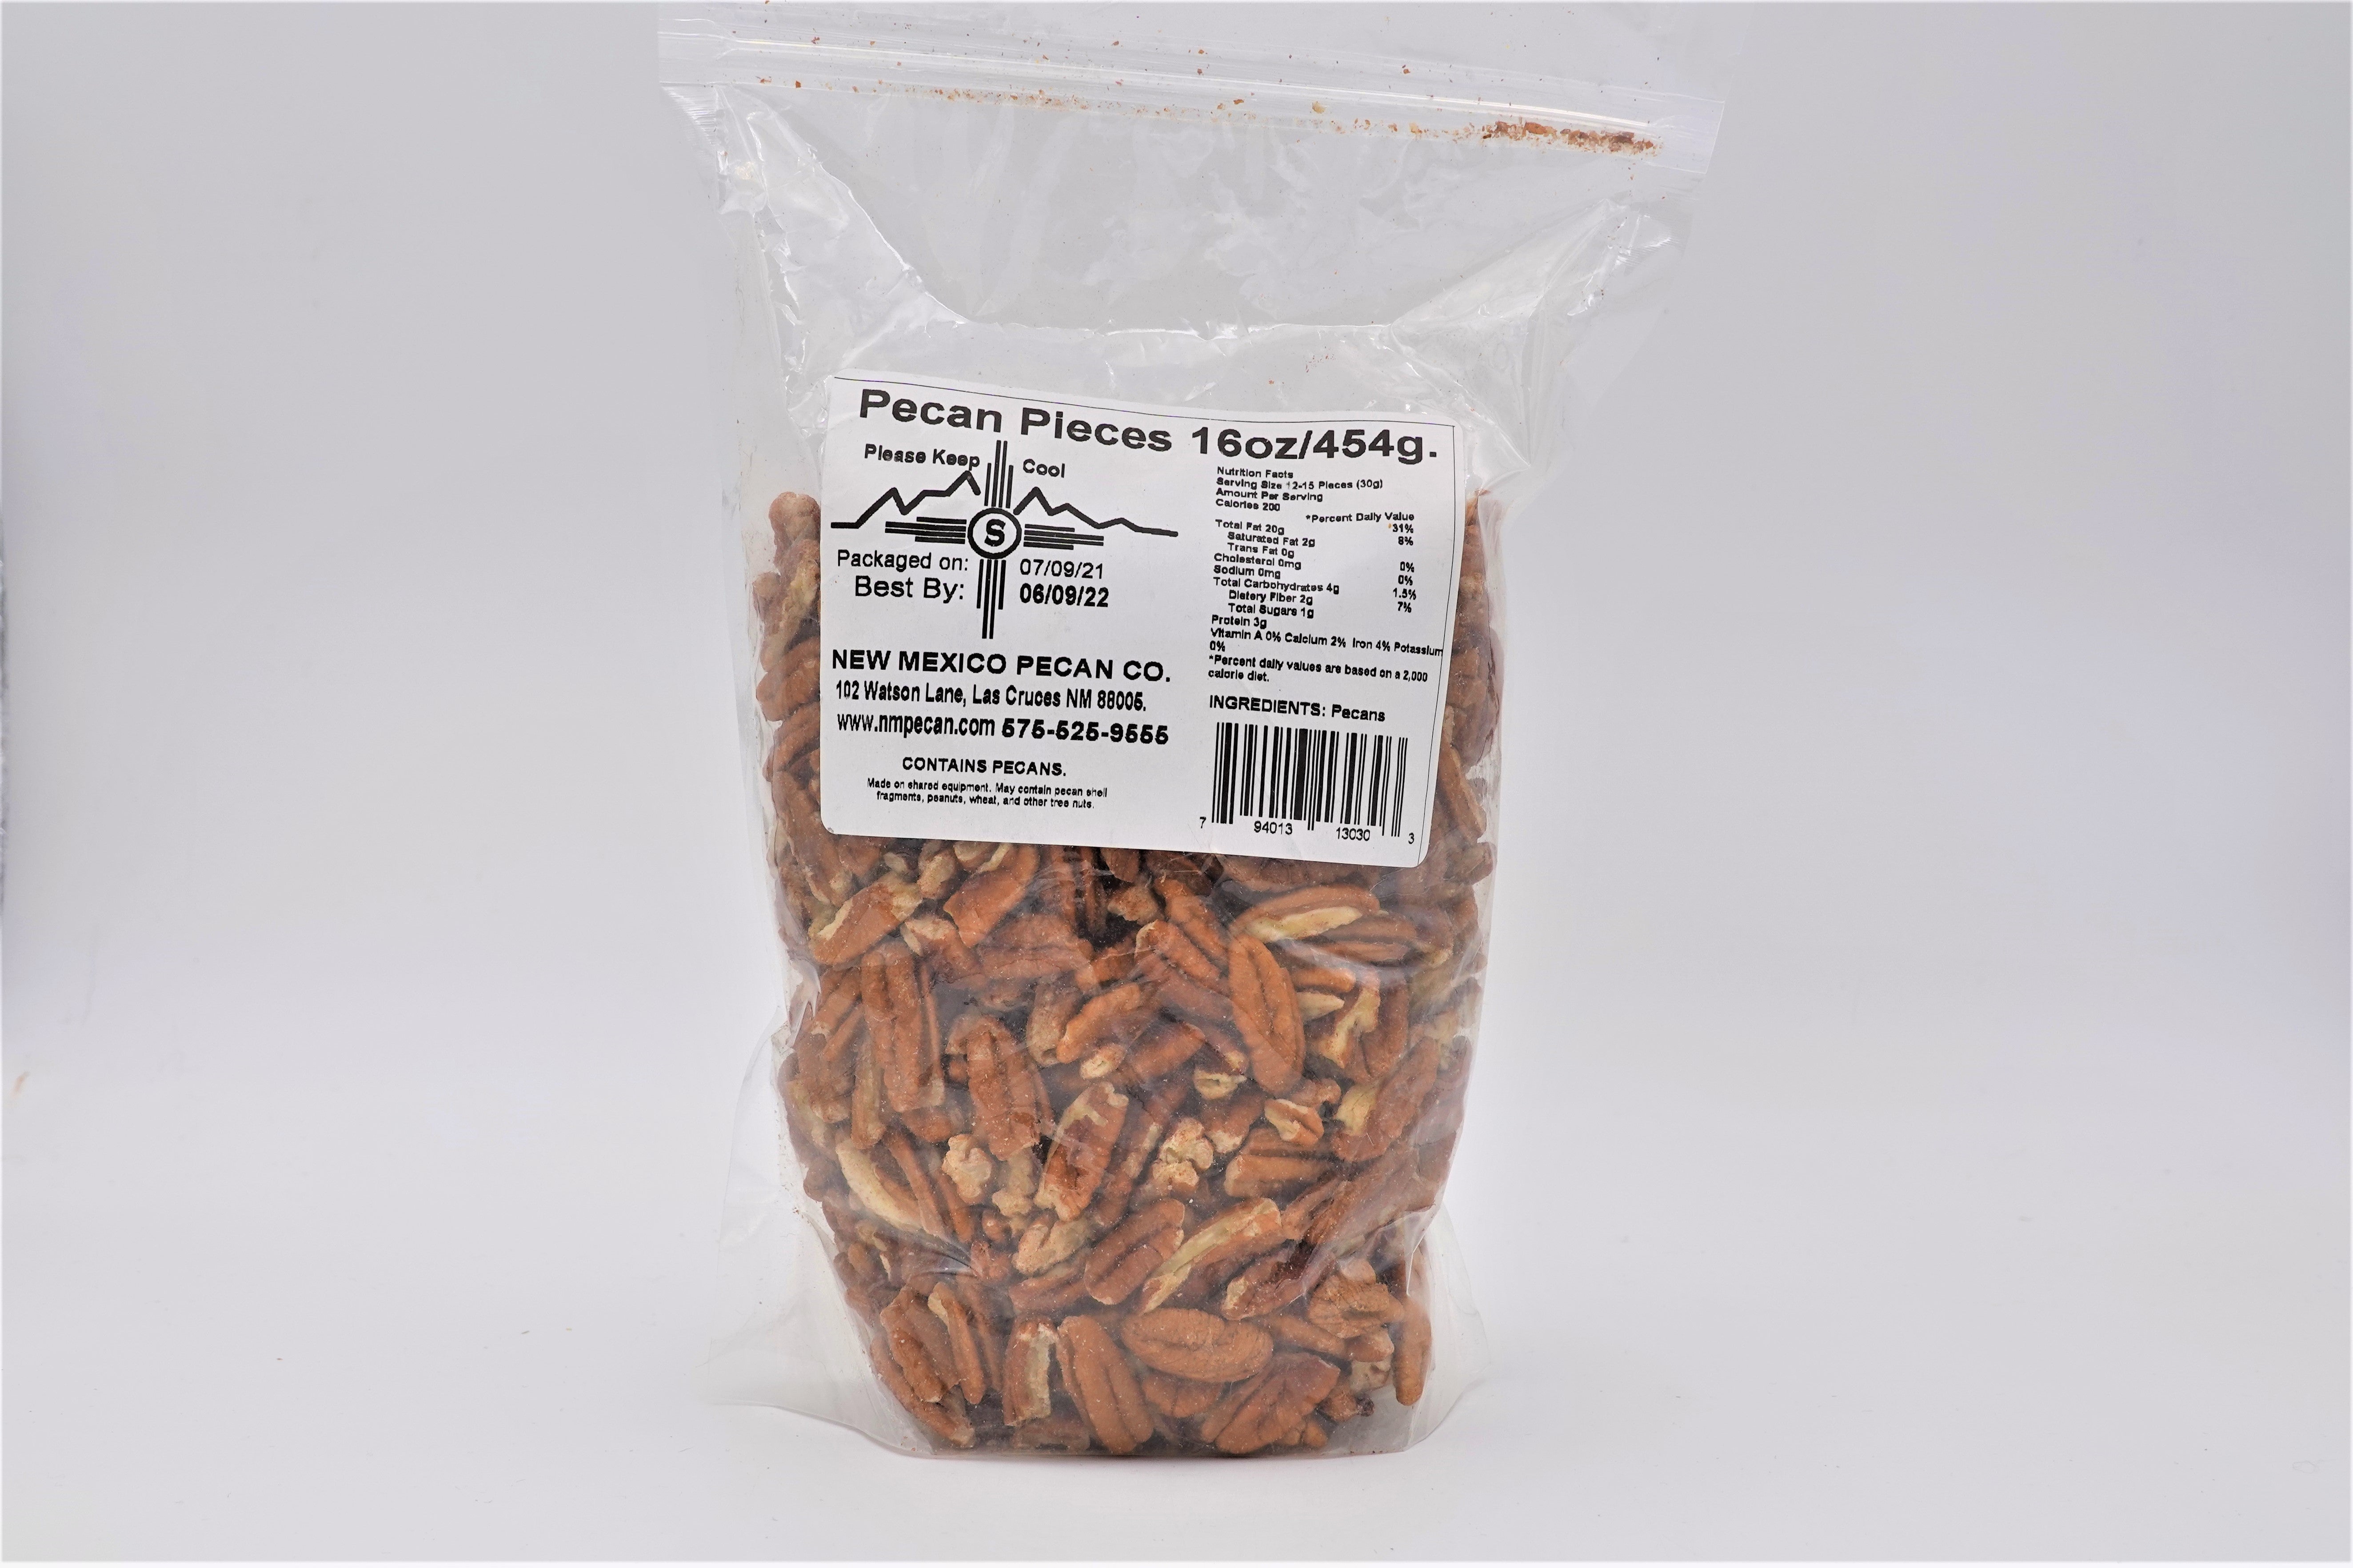 Sentence with product name: A clear plastic bag containing 16 ounces of Pecan Pieces, with labels including nutritional info, barcode, and best-by date visible. The background is plain white.